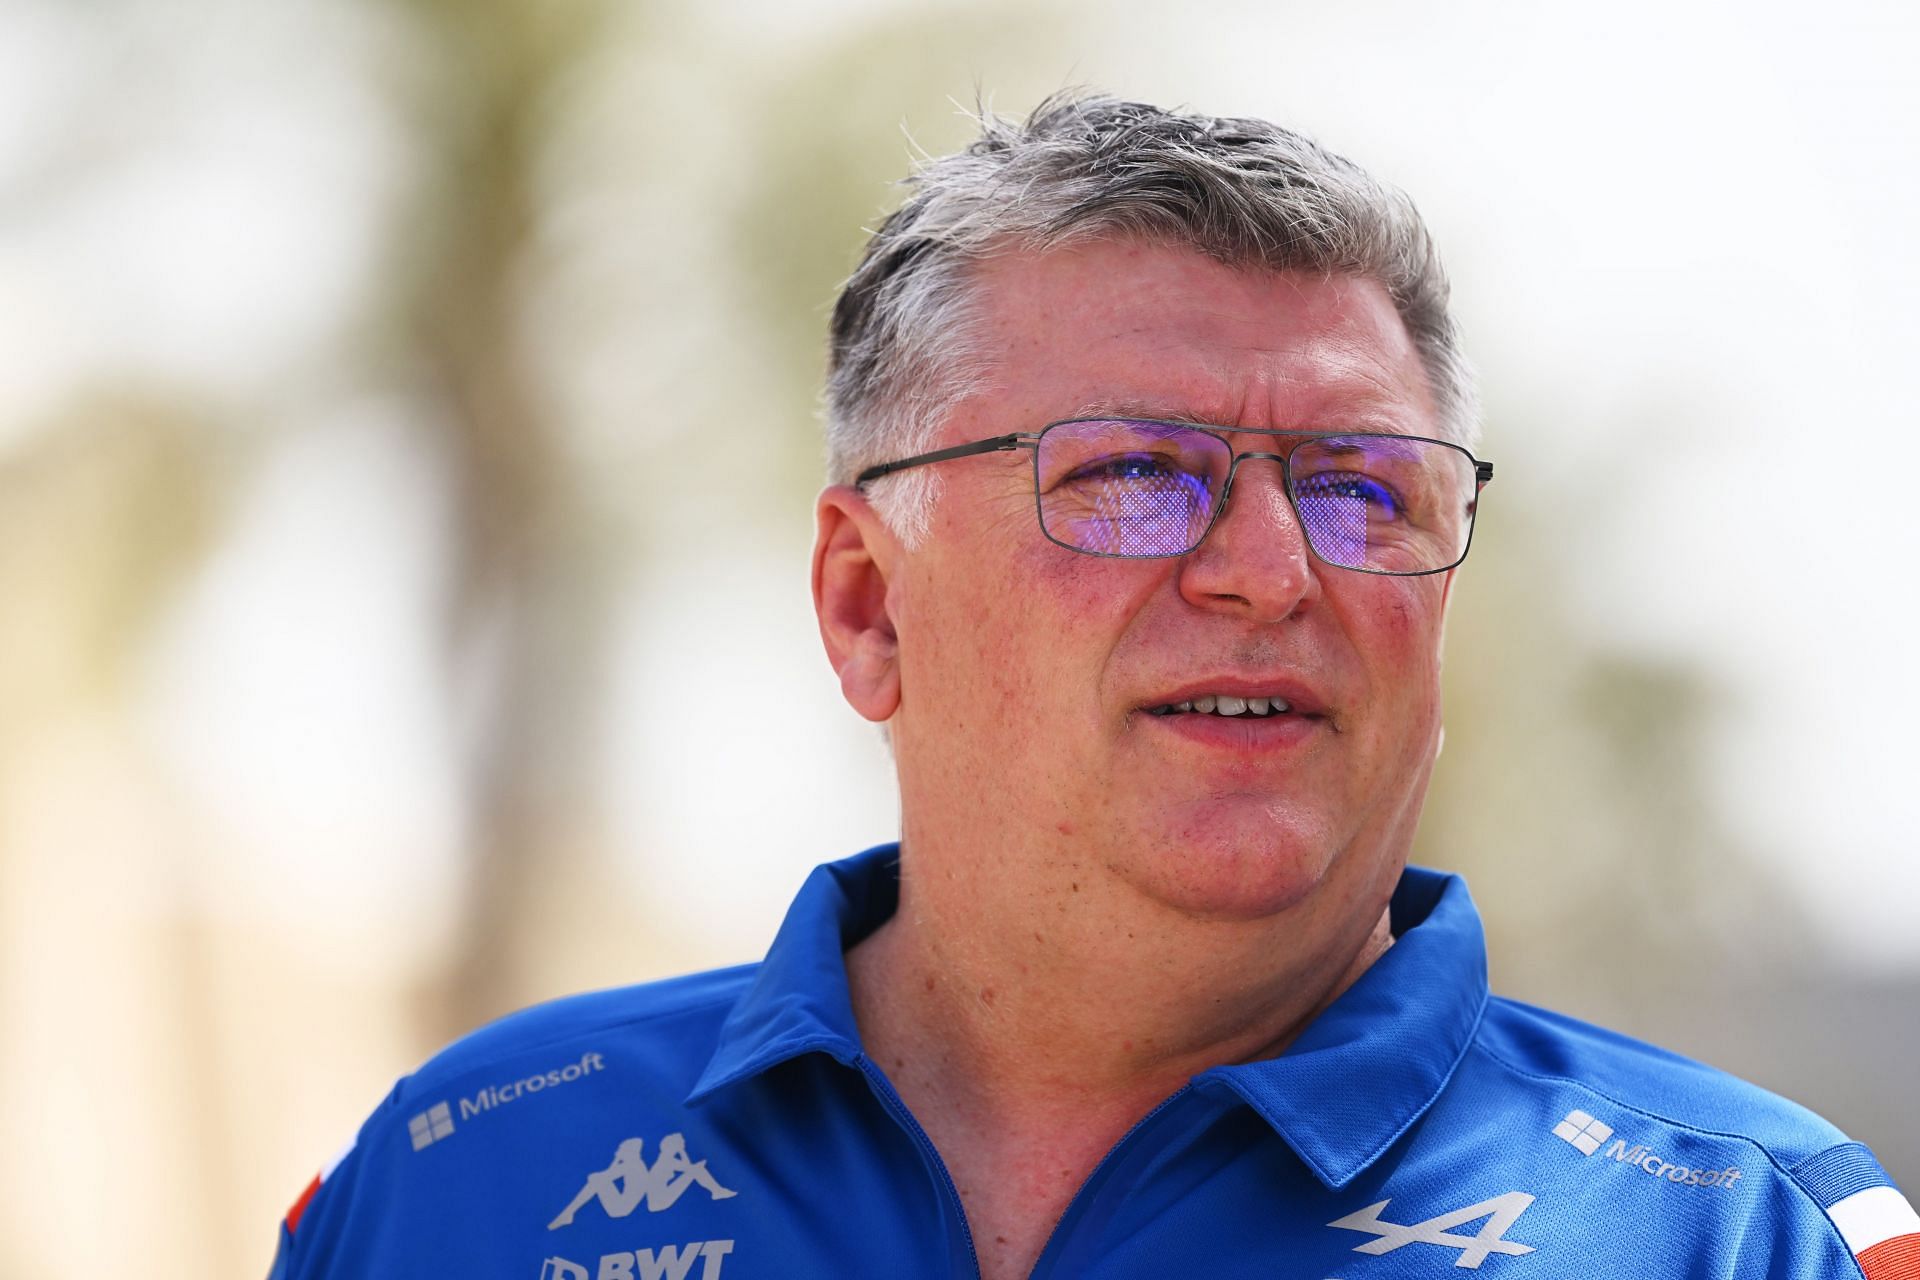 Otmar Szafnauer, team principal of Alpine F1, looks on in the Paddock before final practice ahead of the F1 Grand Prix of Bahrain (Photo by Clive Mason/Getty Images)